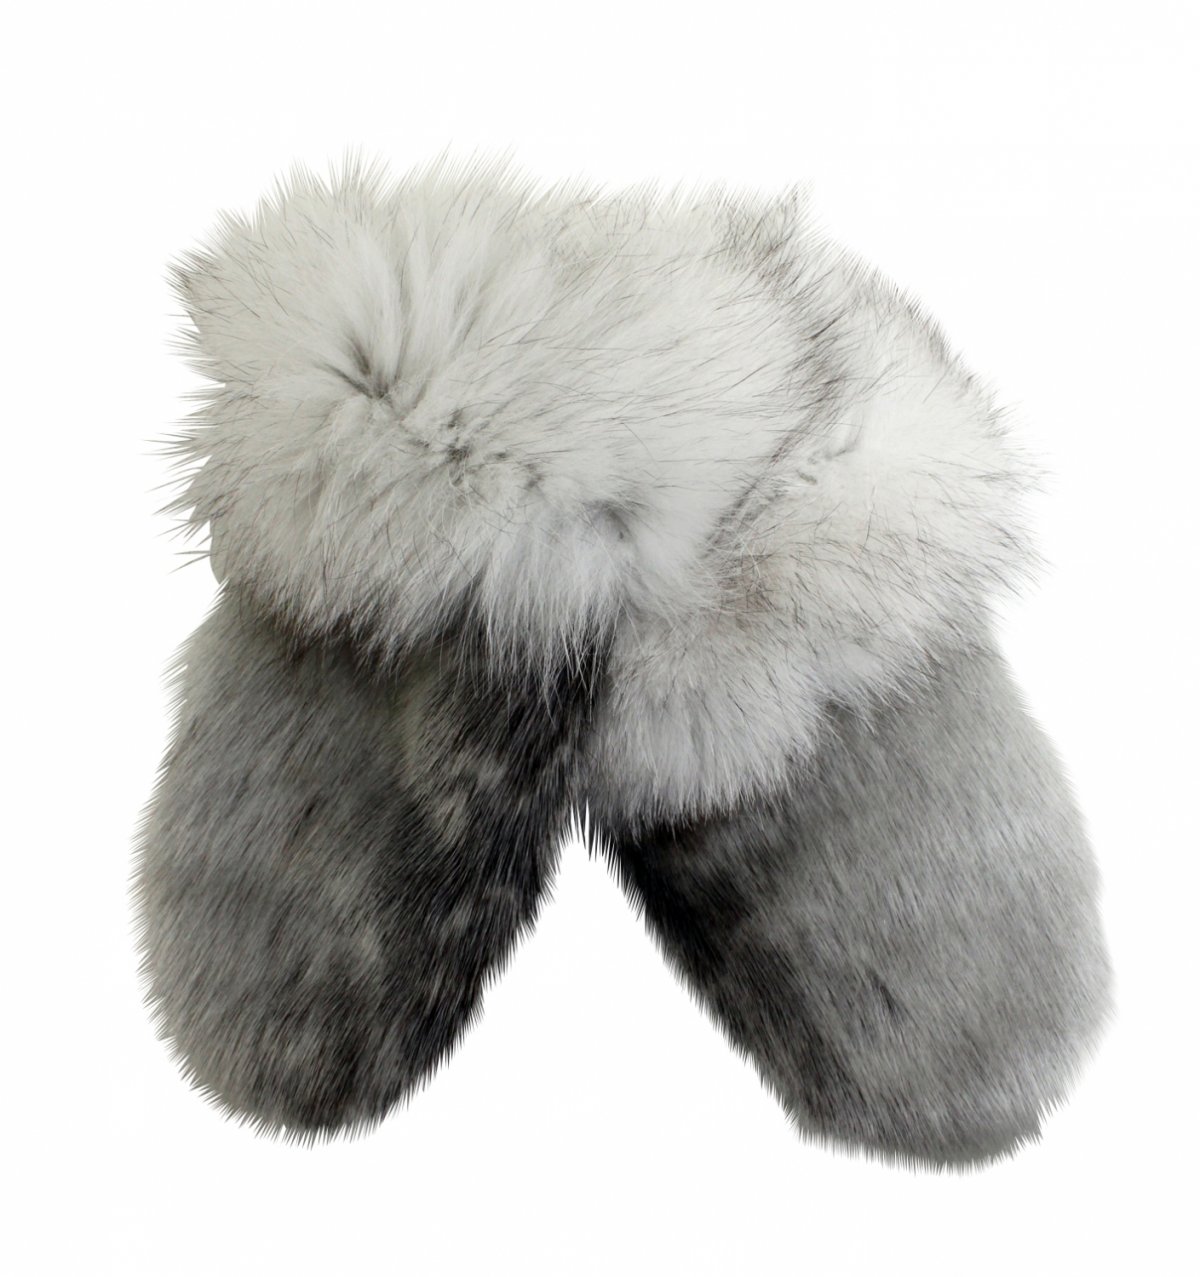 Mitts of sealskin